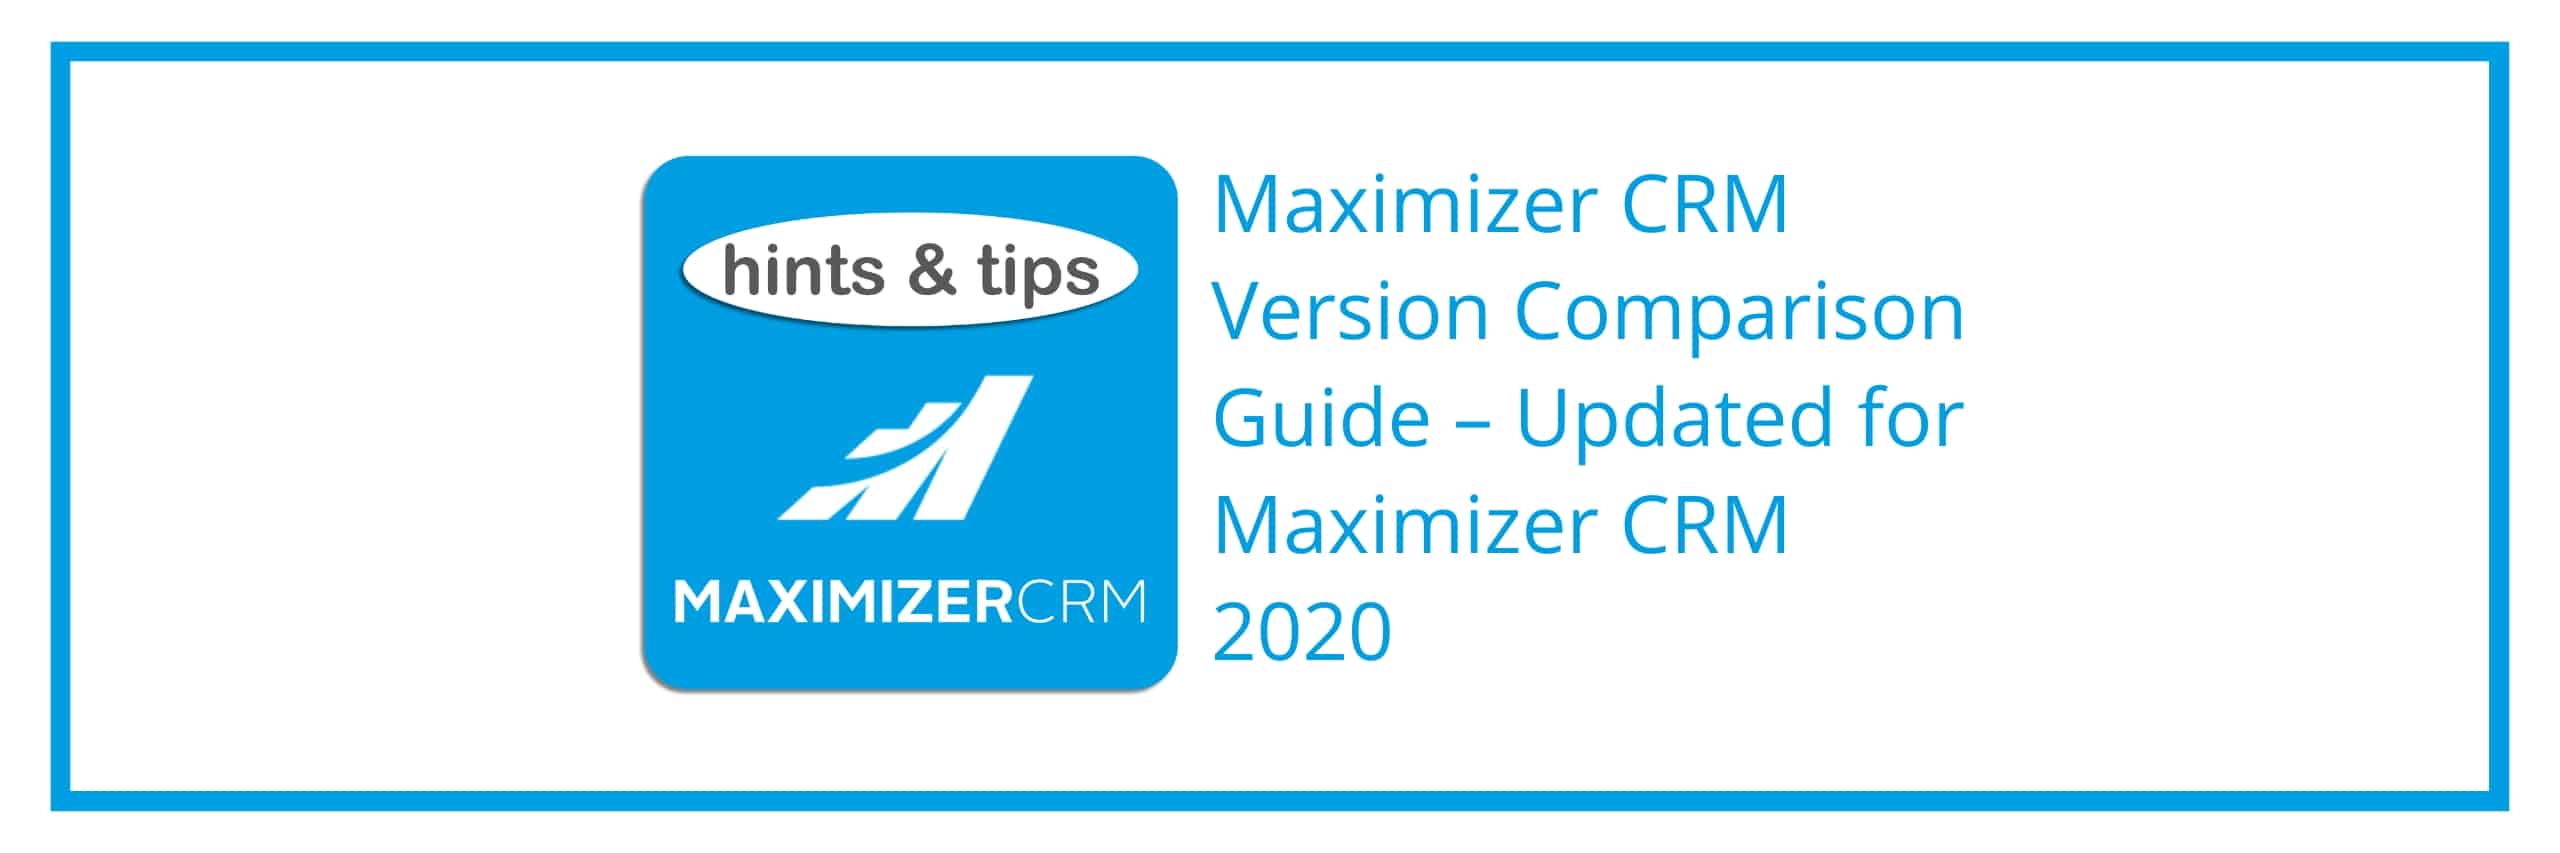 Hints & Tips - Maximizer CRM Version Comparison Guide – Updated for Maximizer CRM 2020